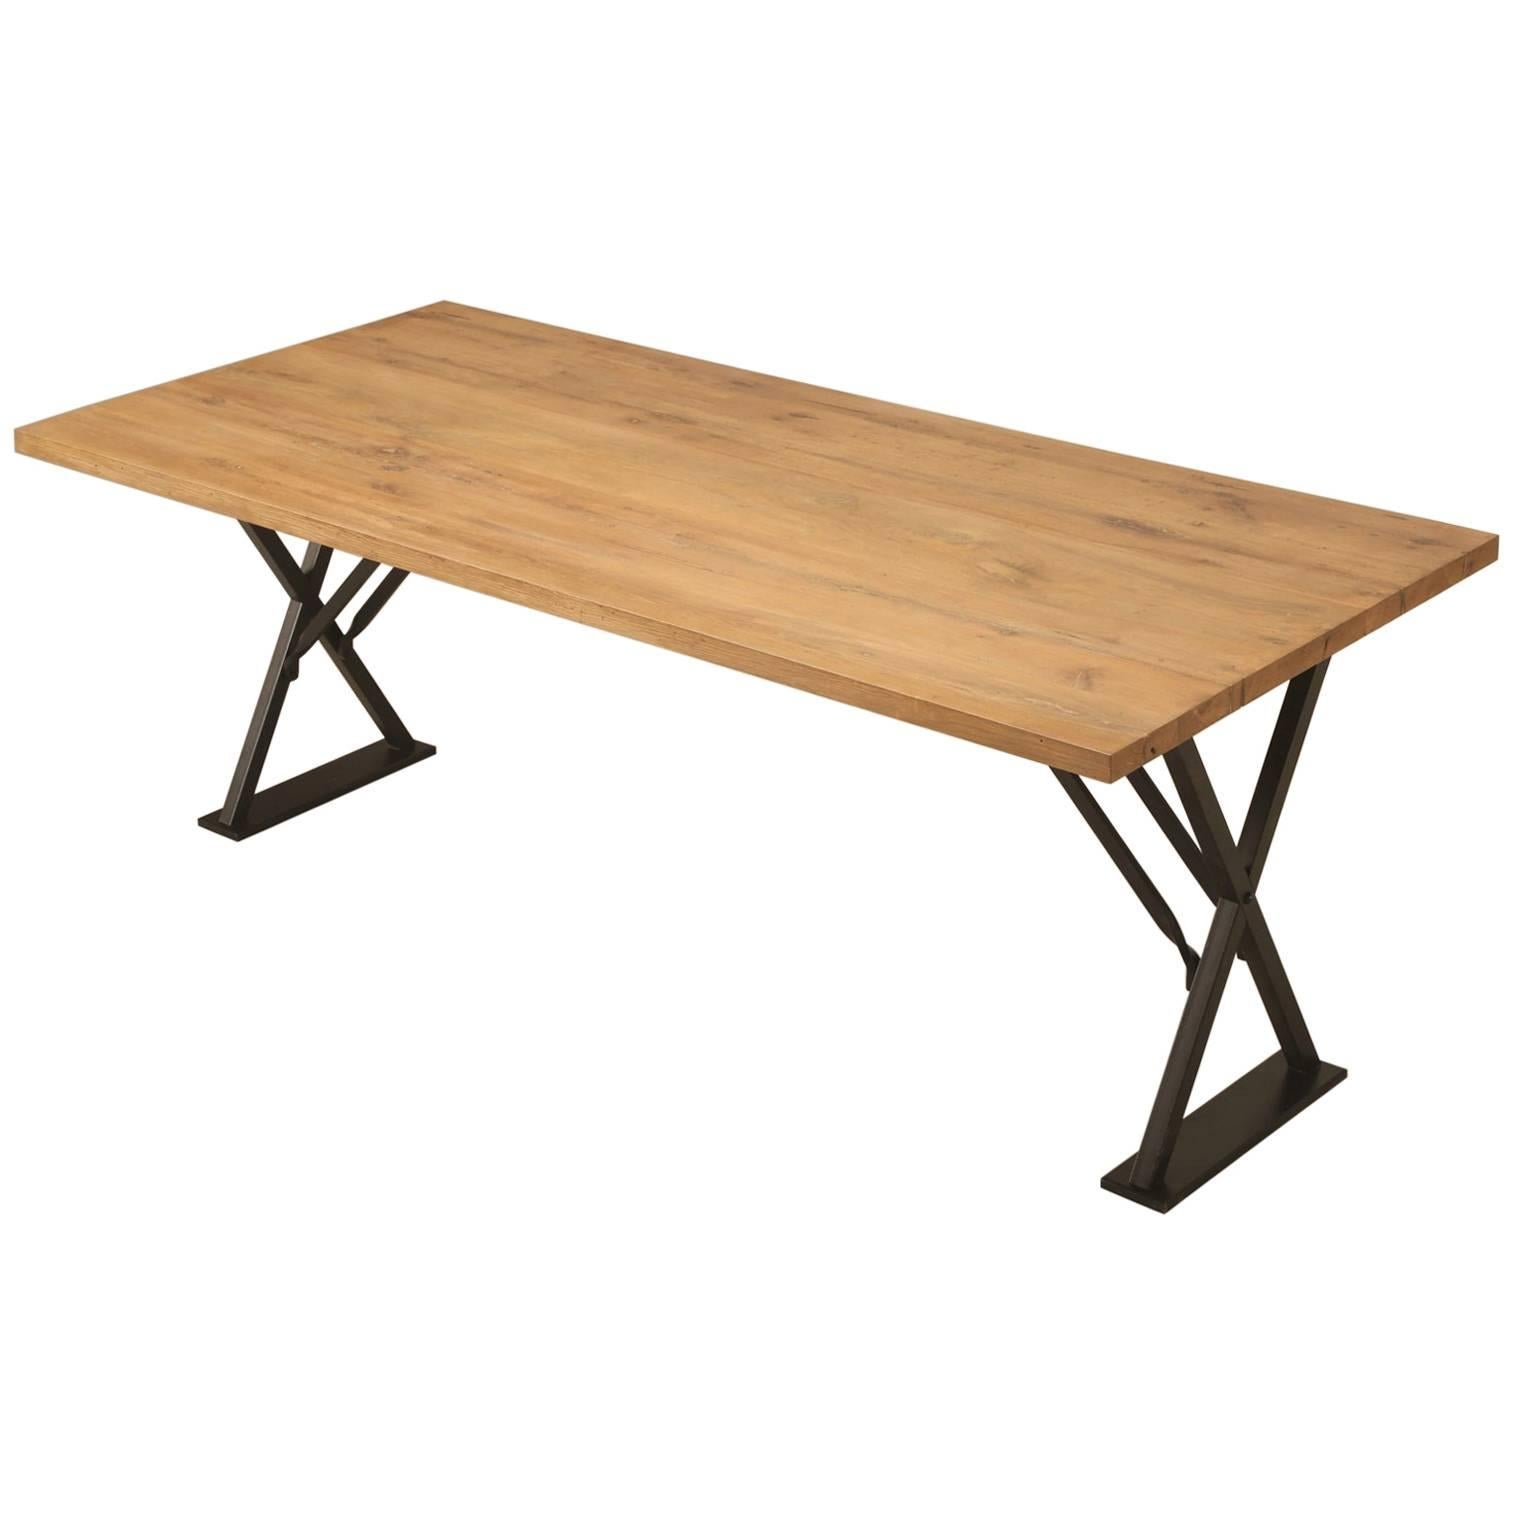 Industrial Inspired Kitchen Table from French White Oak and Steel